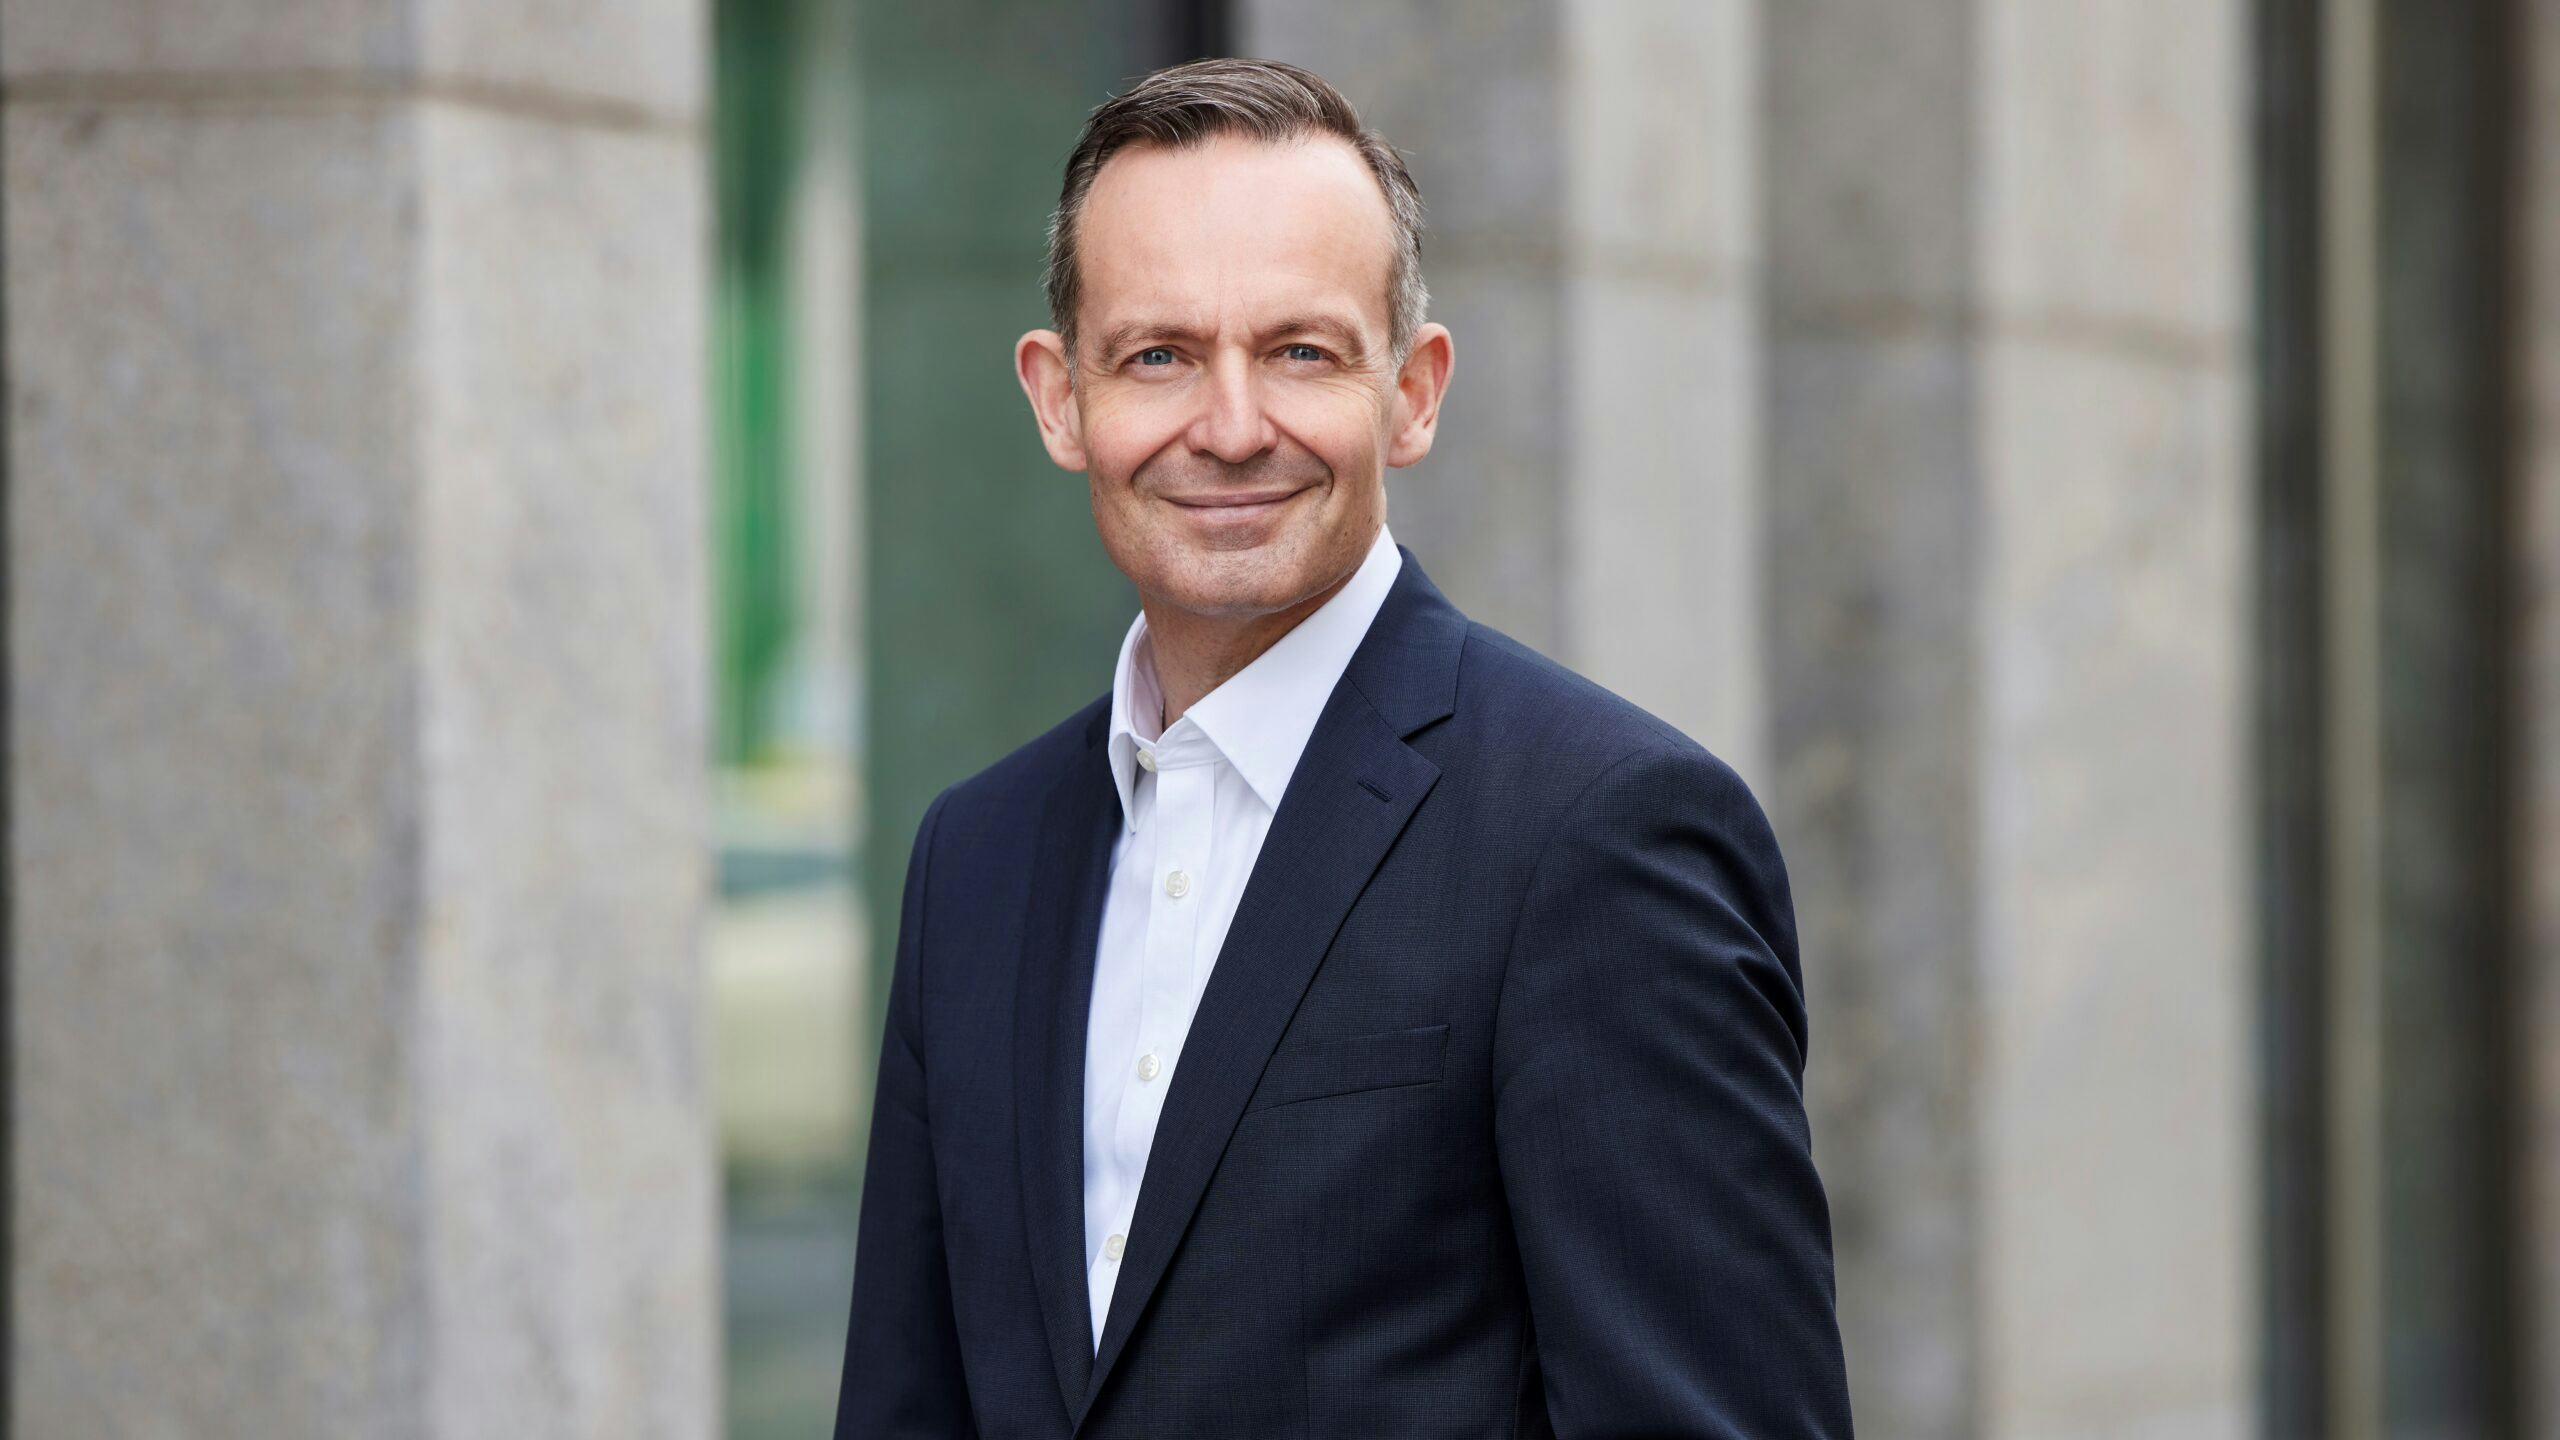 Germany's Federal Minister for Digital and Transport, Dr. Volker Wissing, will be the keynote speaker during the Eurobike Convention on day one of the tradefair. - Photo Eurobike